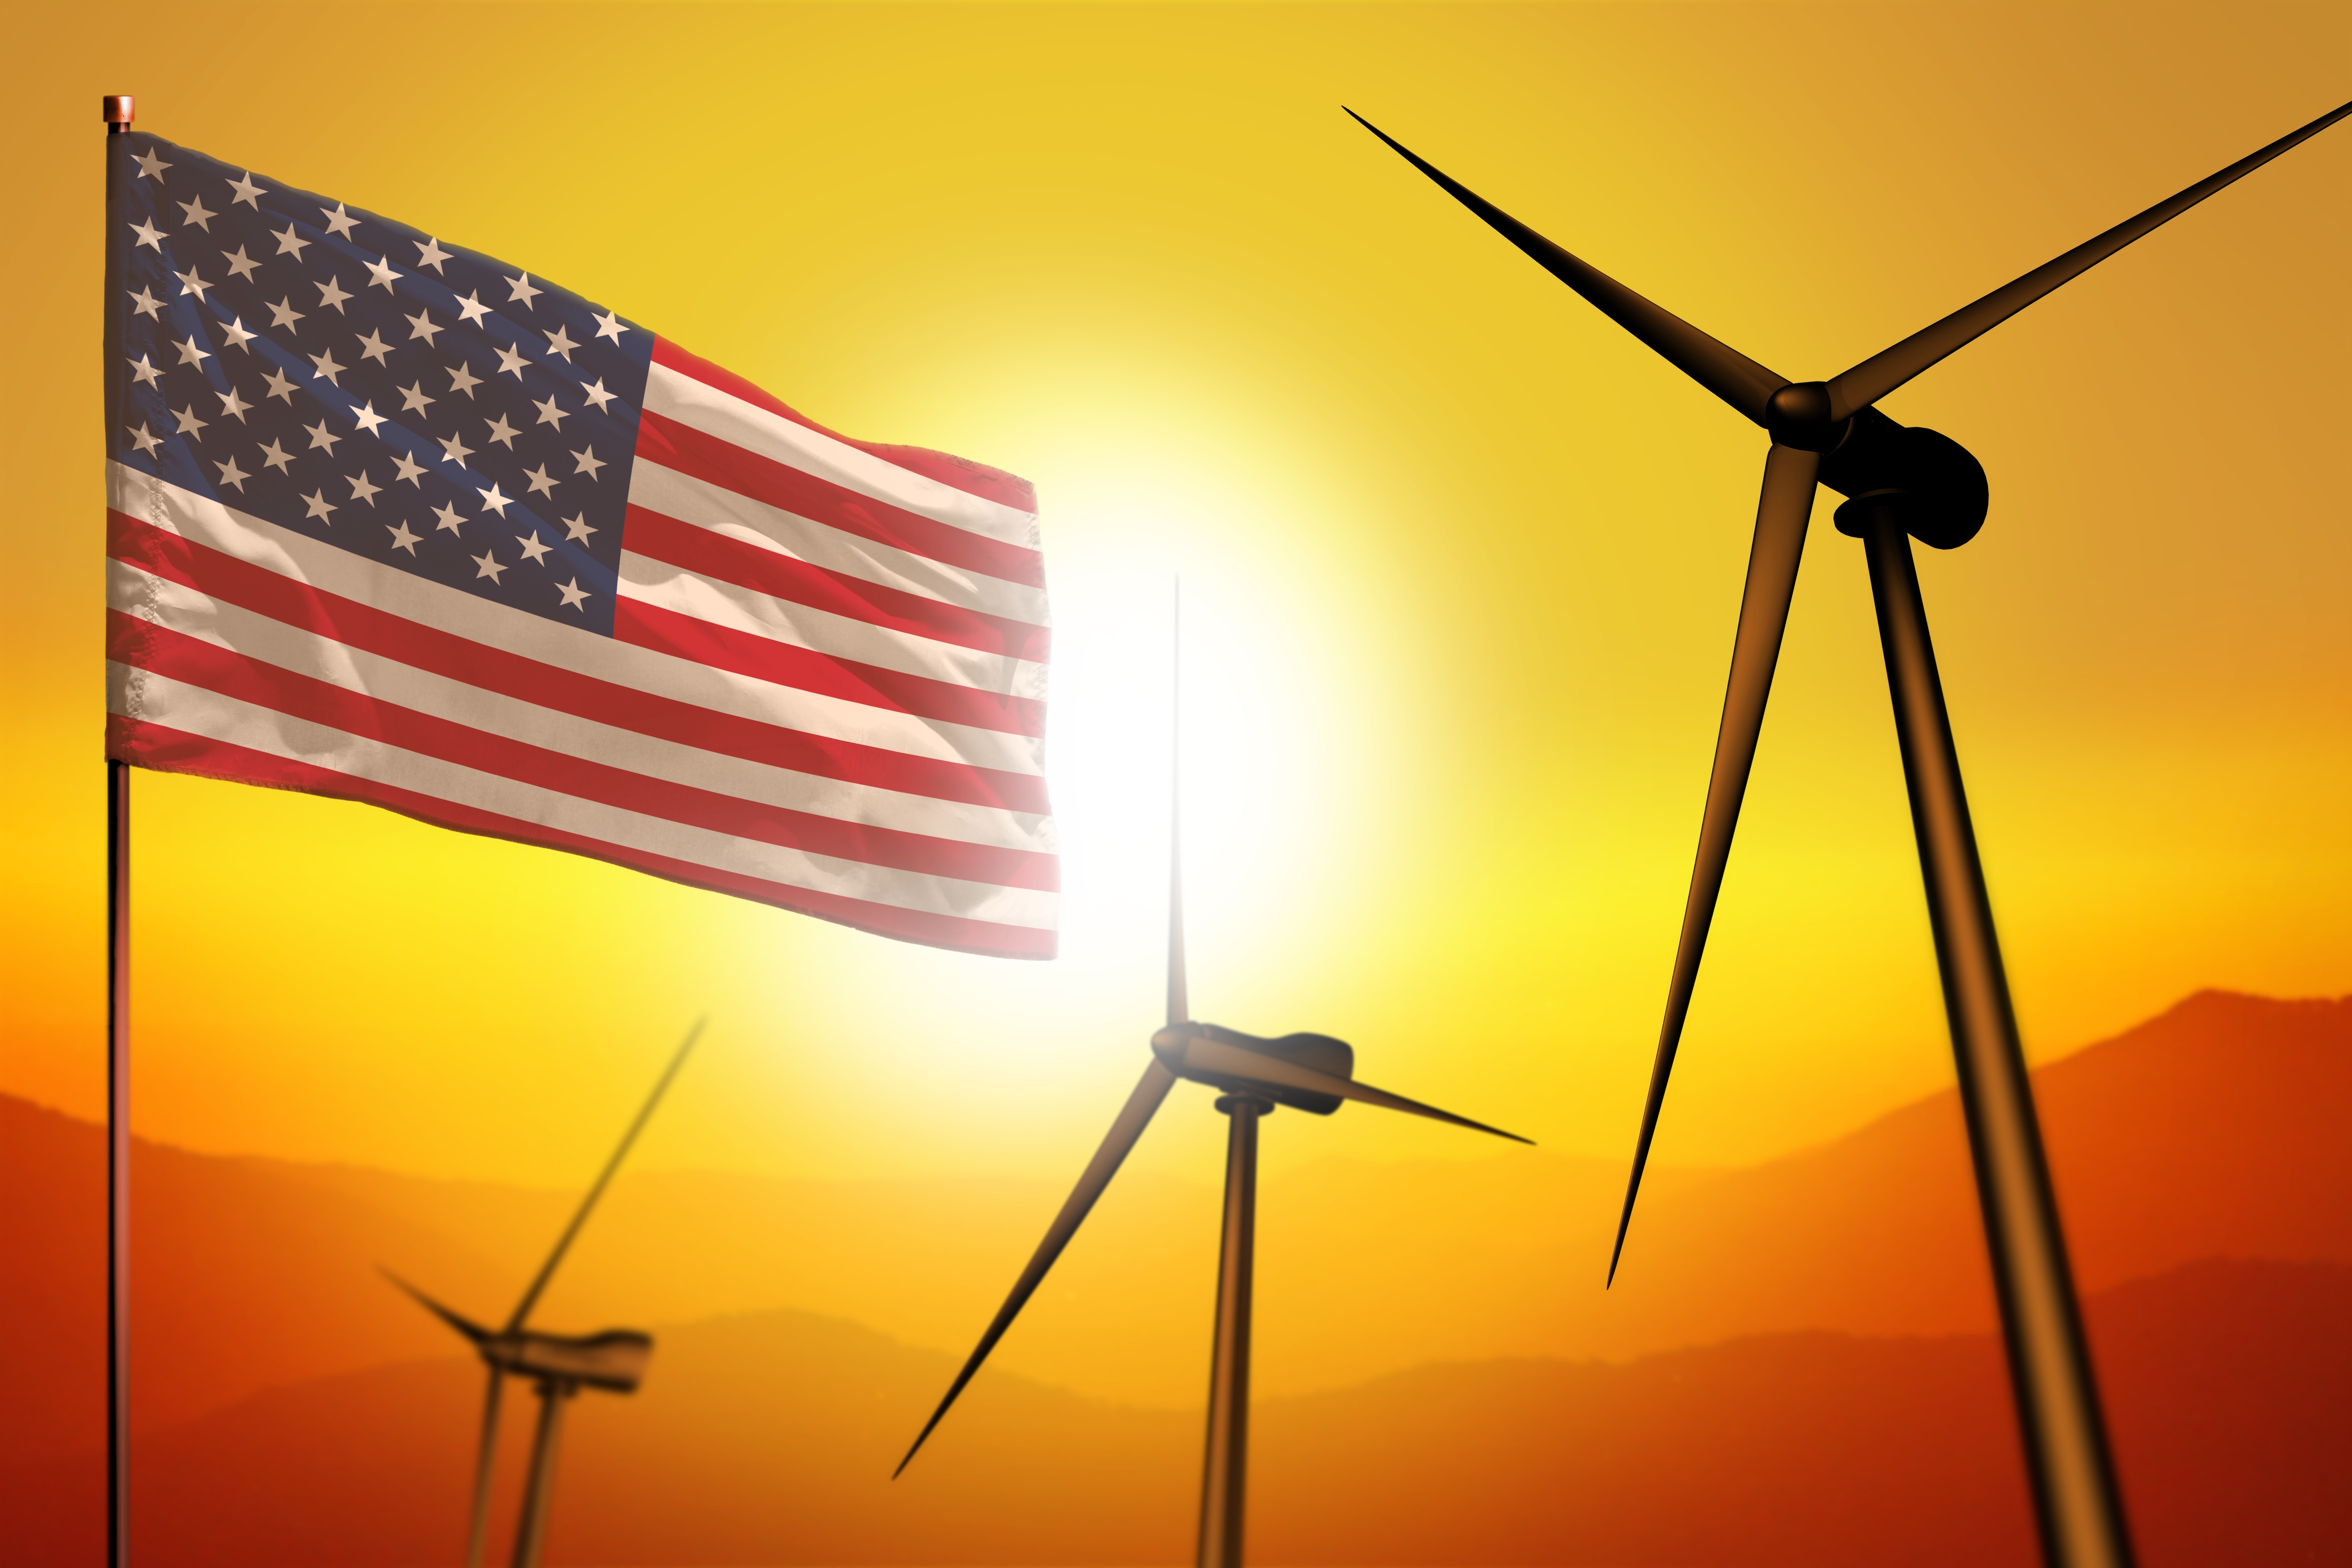 a flag and wind turbines